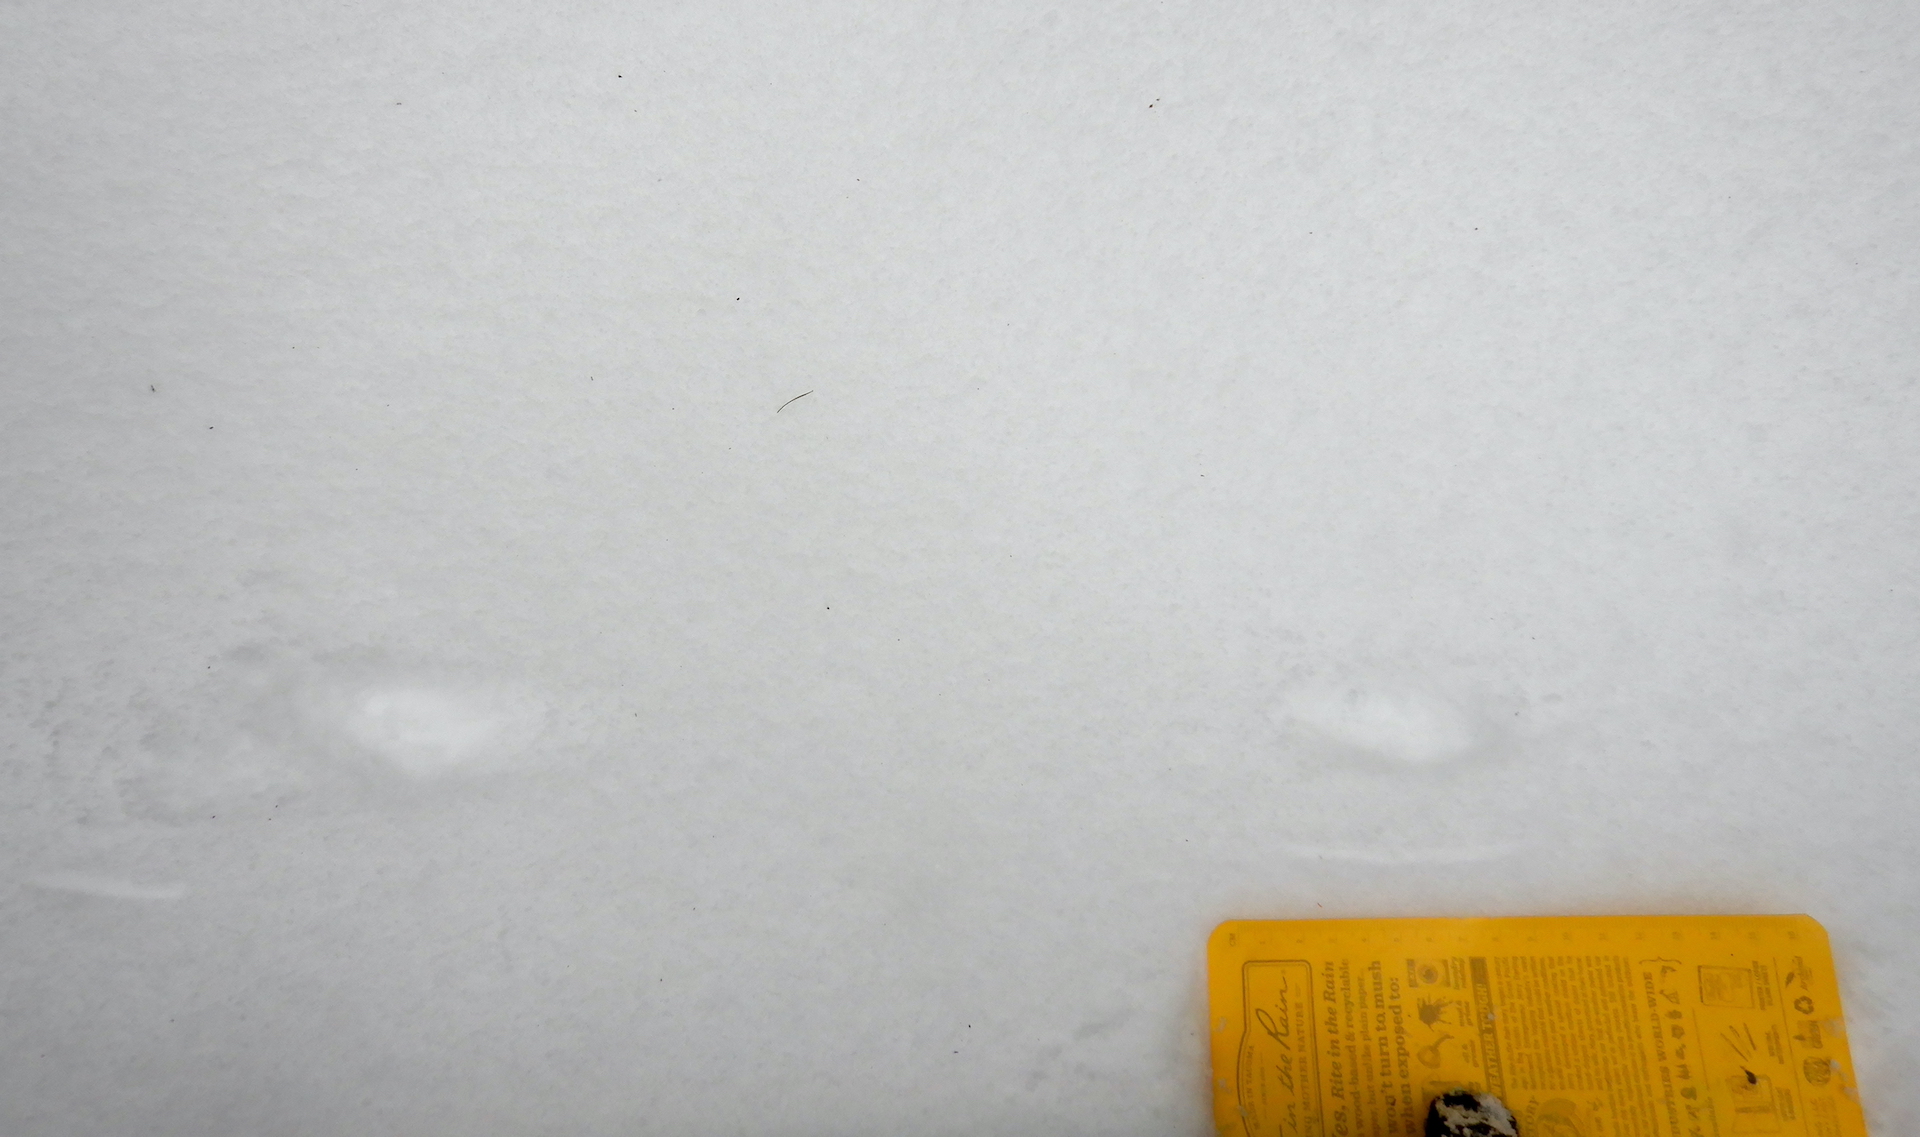 Two sets of long-tailed weasel tracks. Each set makes a single depression in snow. A light slash is visible beneath the weasel prints. The width of the yellow notebook at bottom is about 17 cm.